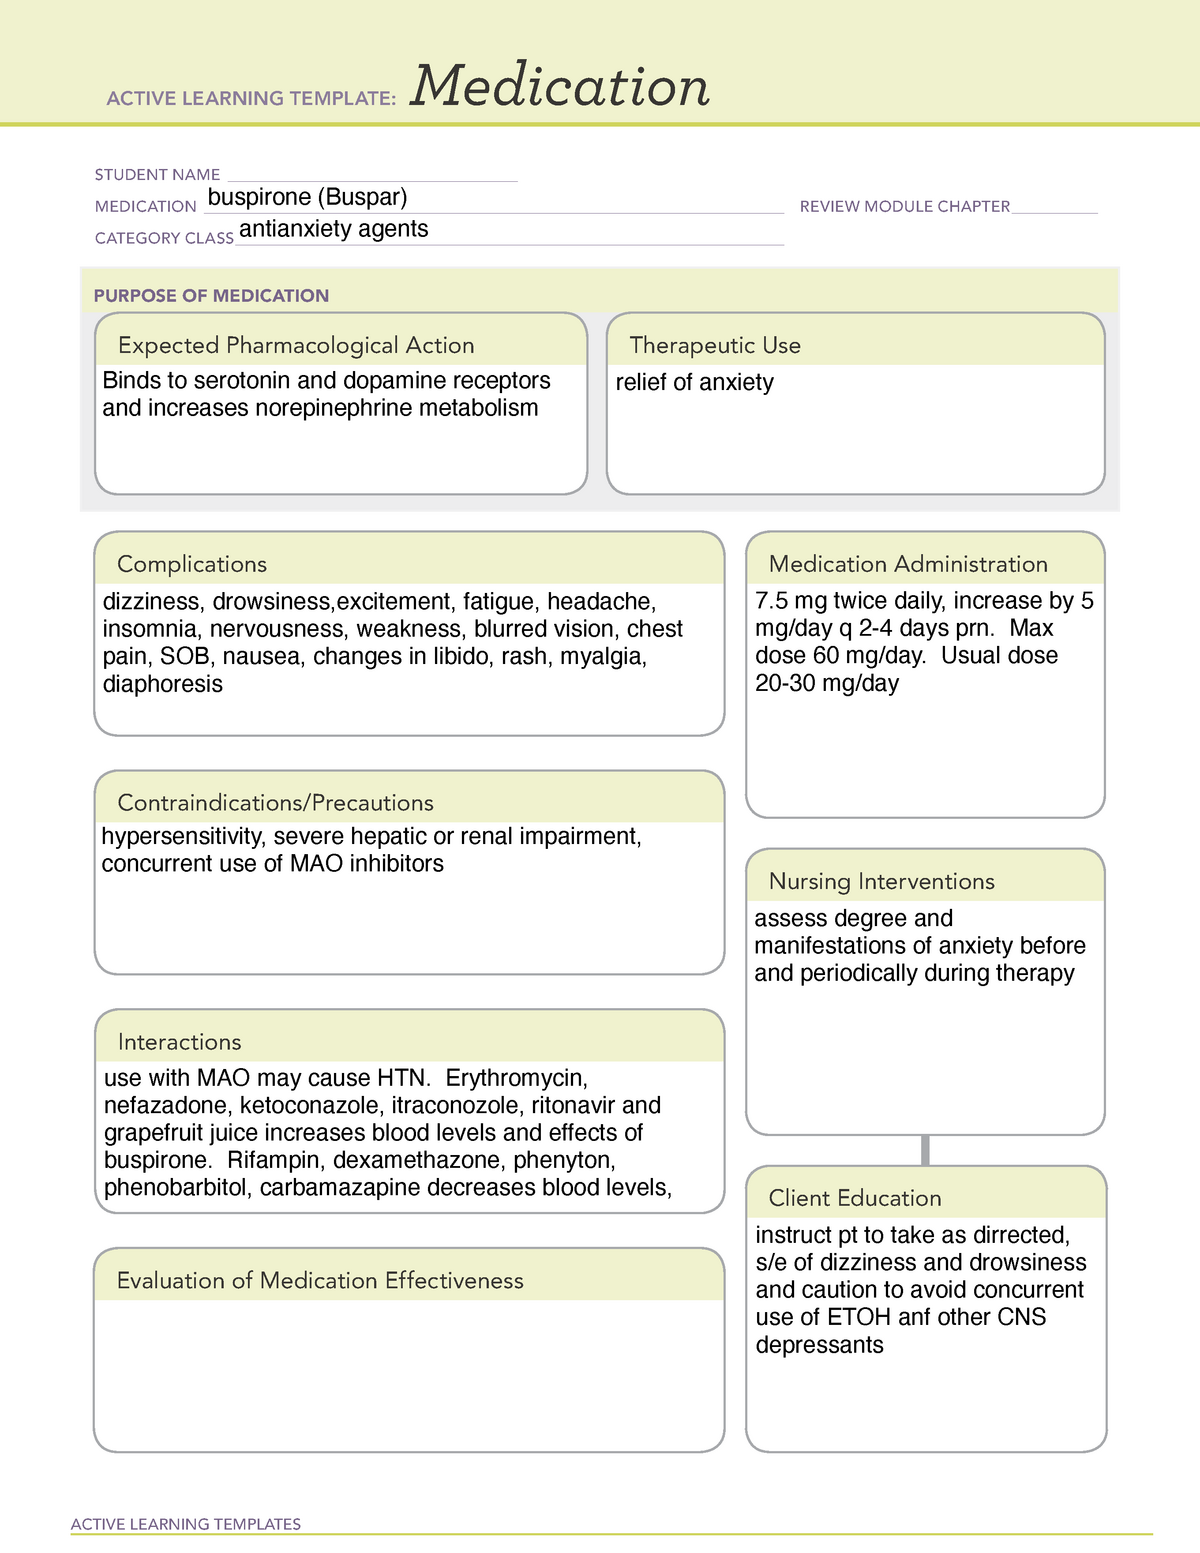 Buspirone ATI medication template ACTIVE LEARNING TEMPLATES